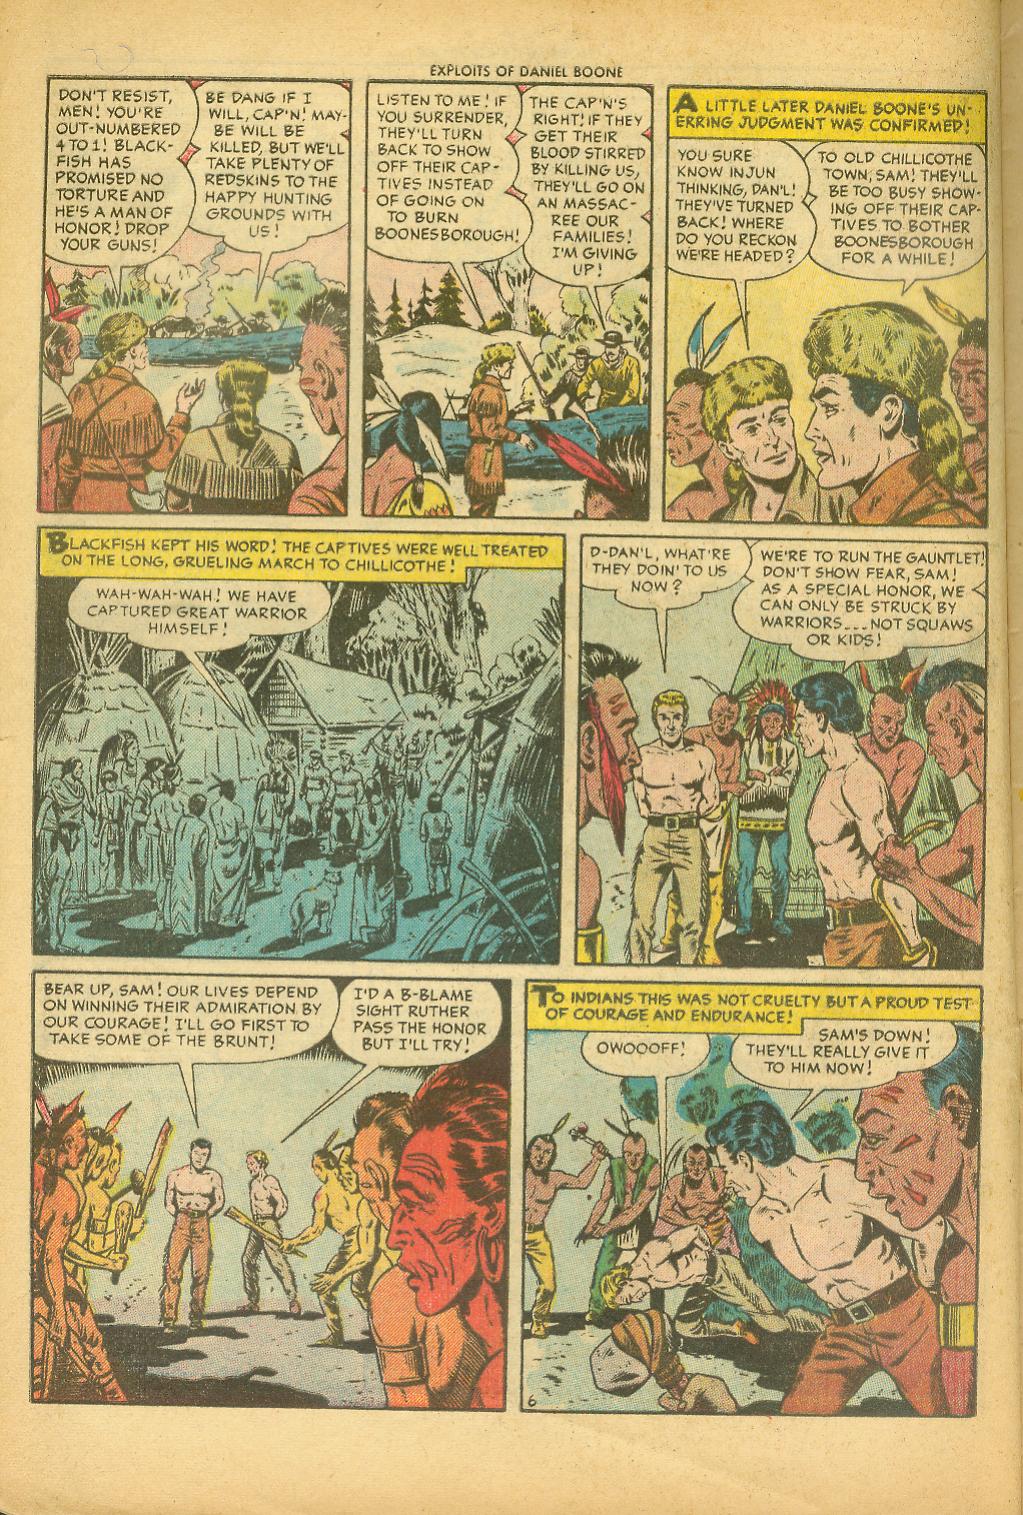 Read online Exploits of Daniel Boone comic -  Issue #1 - 8